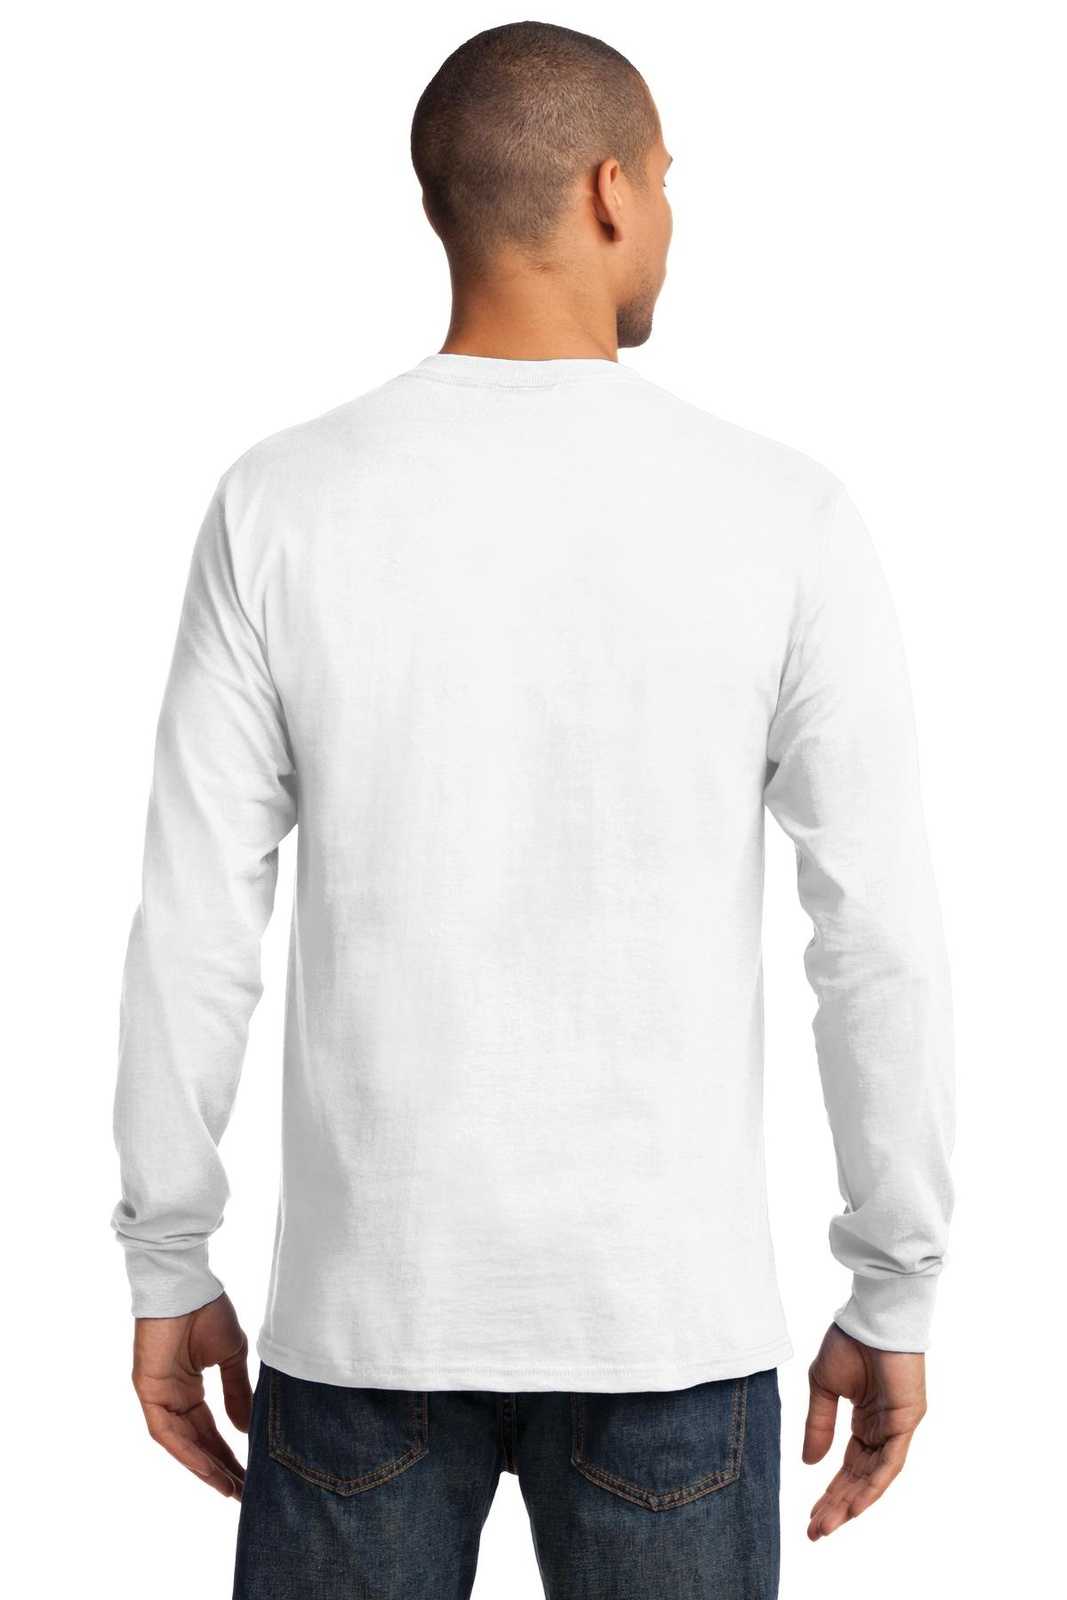 Port & Company PC61LST Tall Long Sleeve Essential Tee - White - HIT a Double - 1